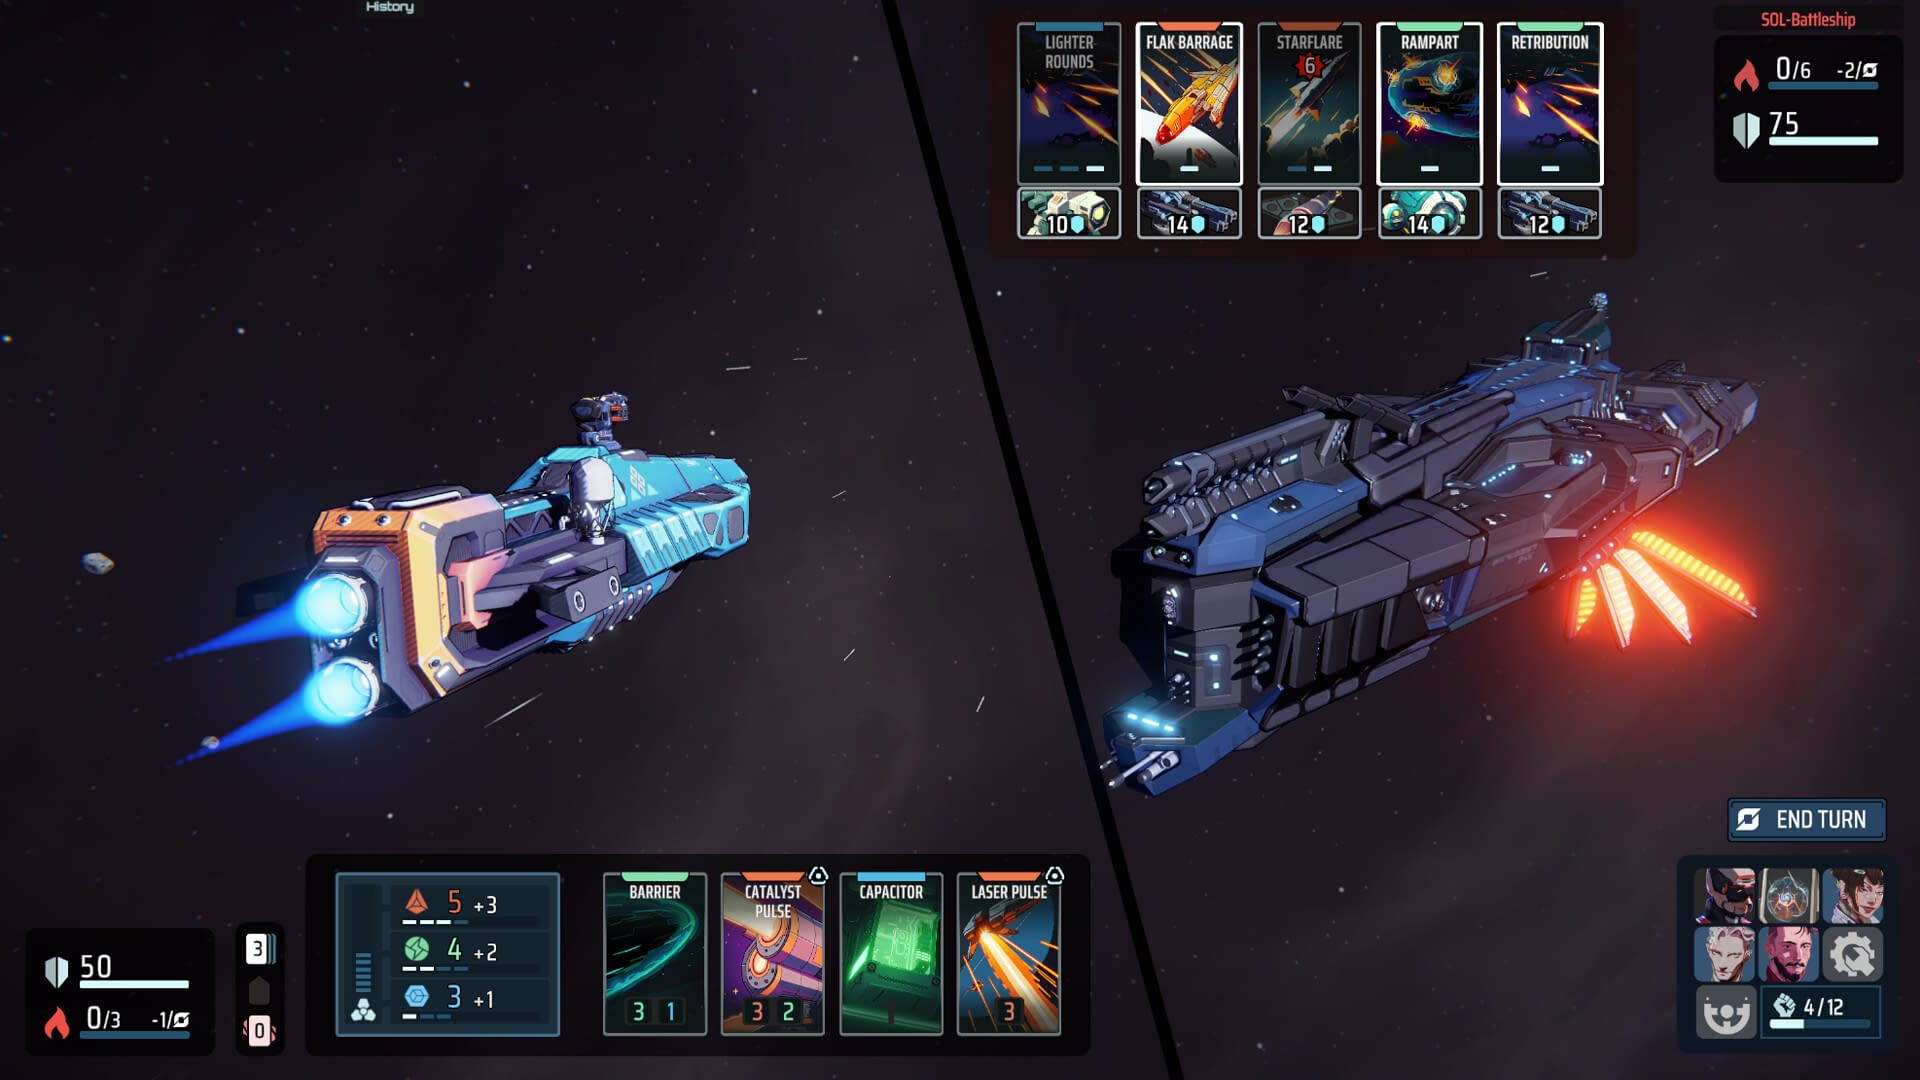 Breachway Combine Space Theme With Card System